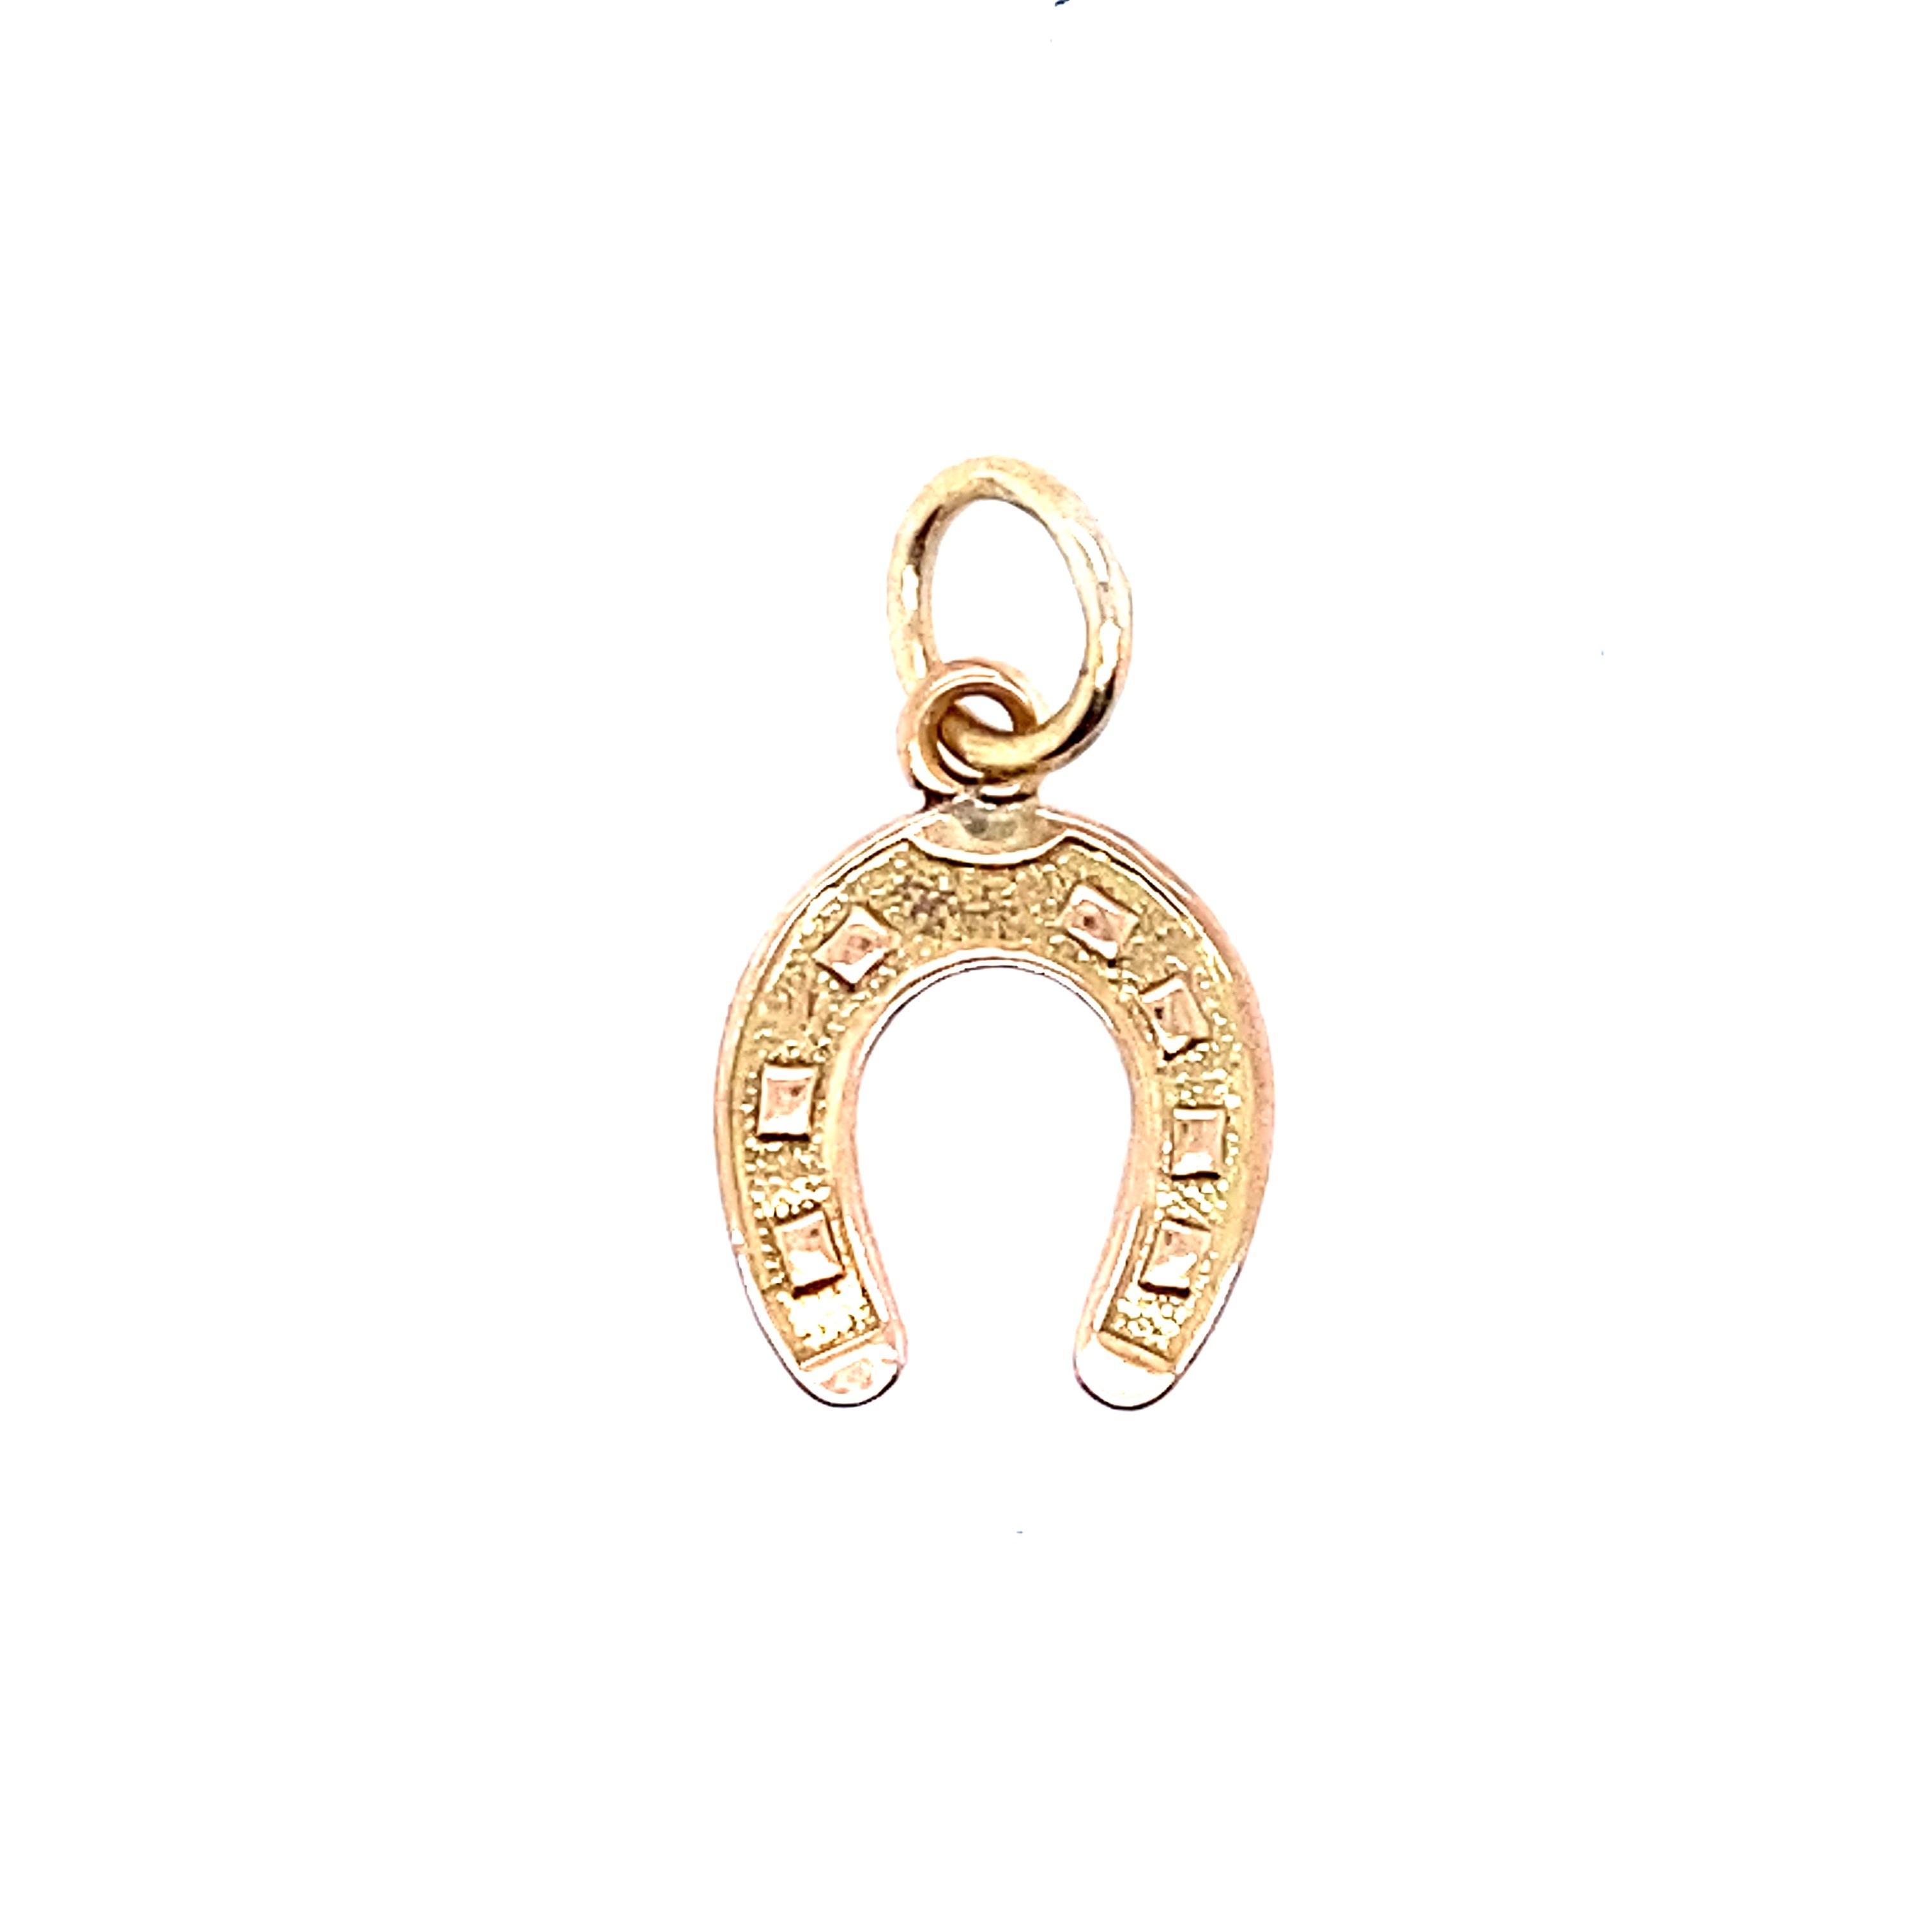 A horseshoe charm in yellow gold